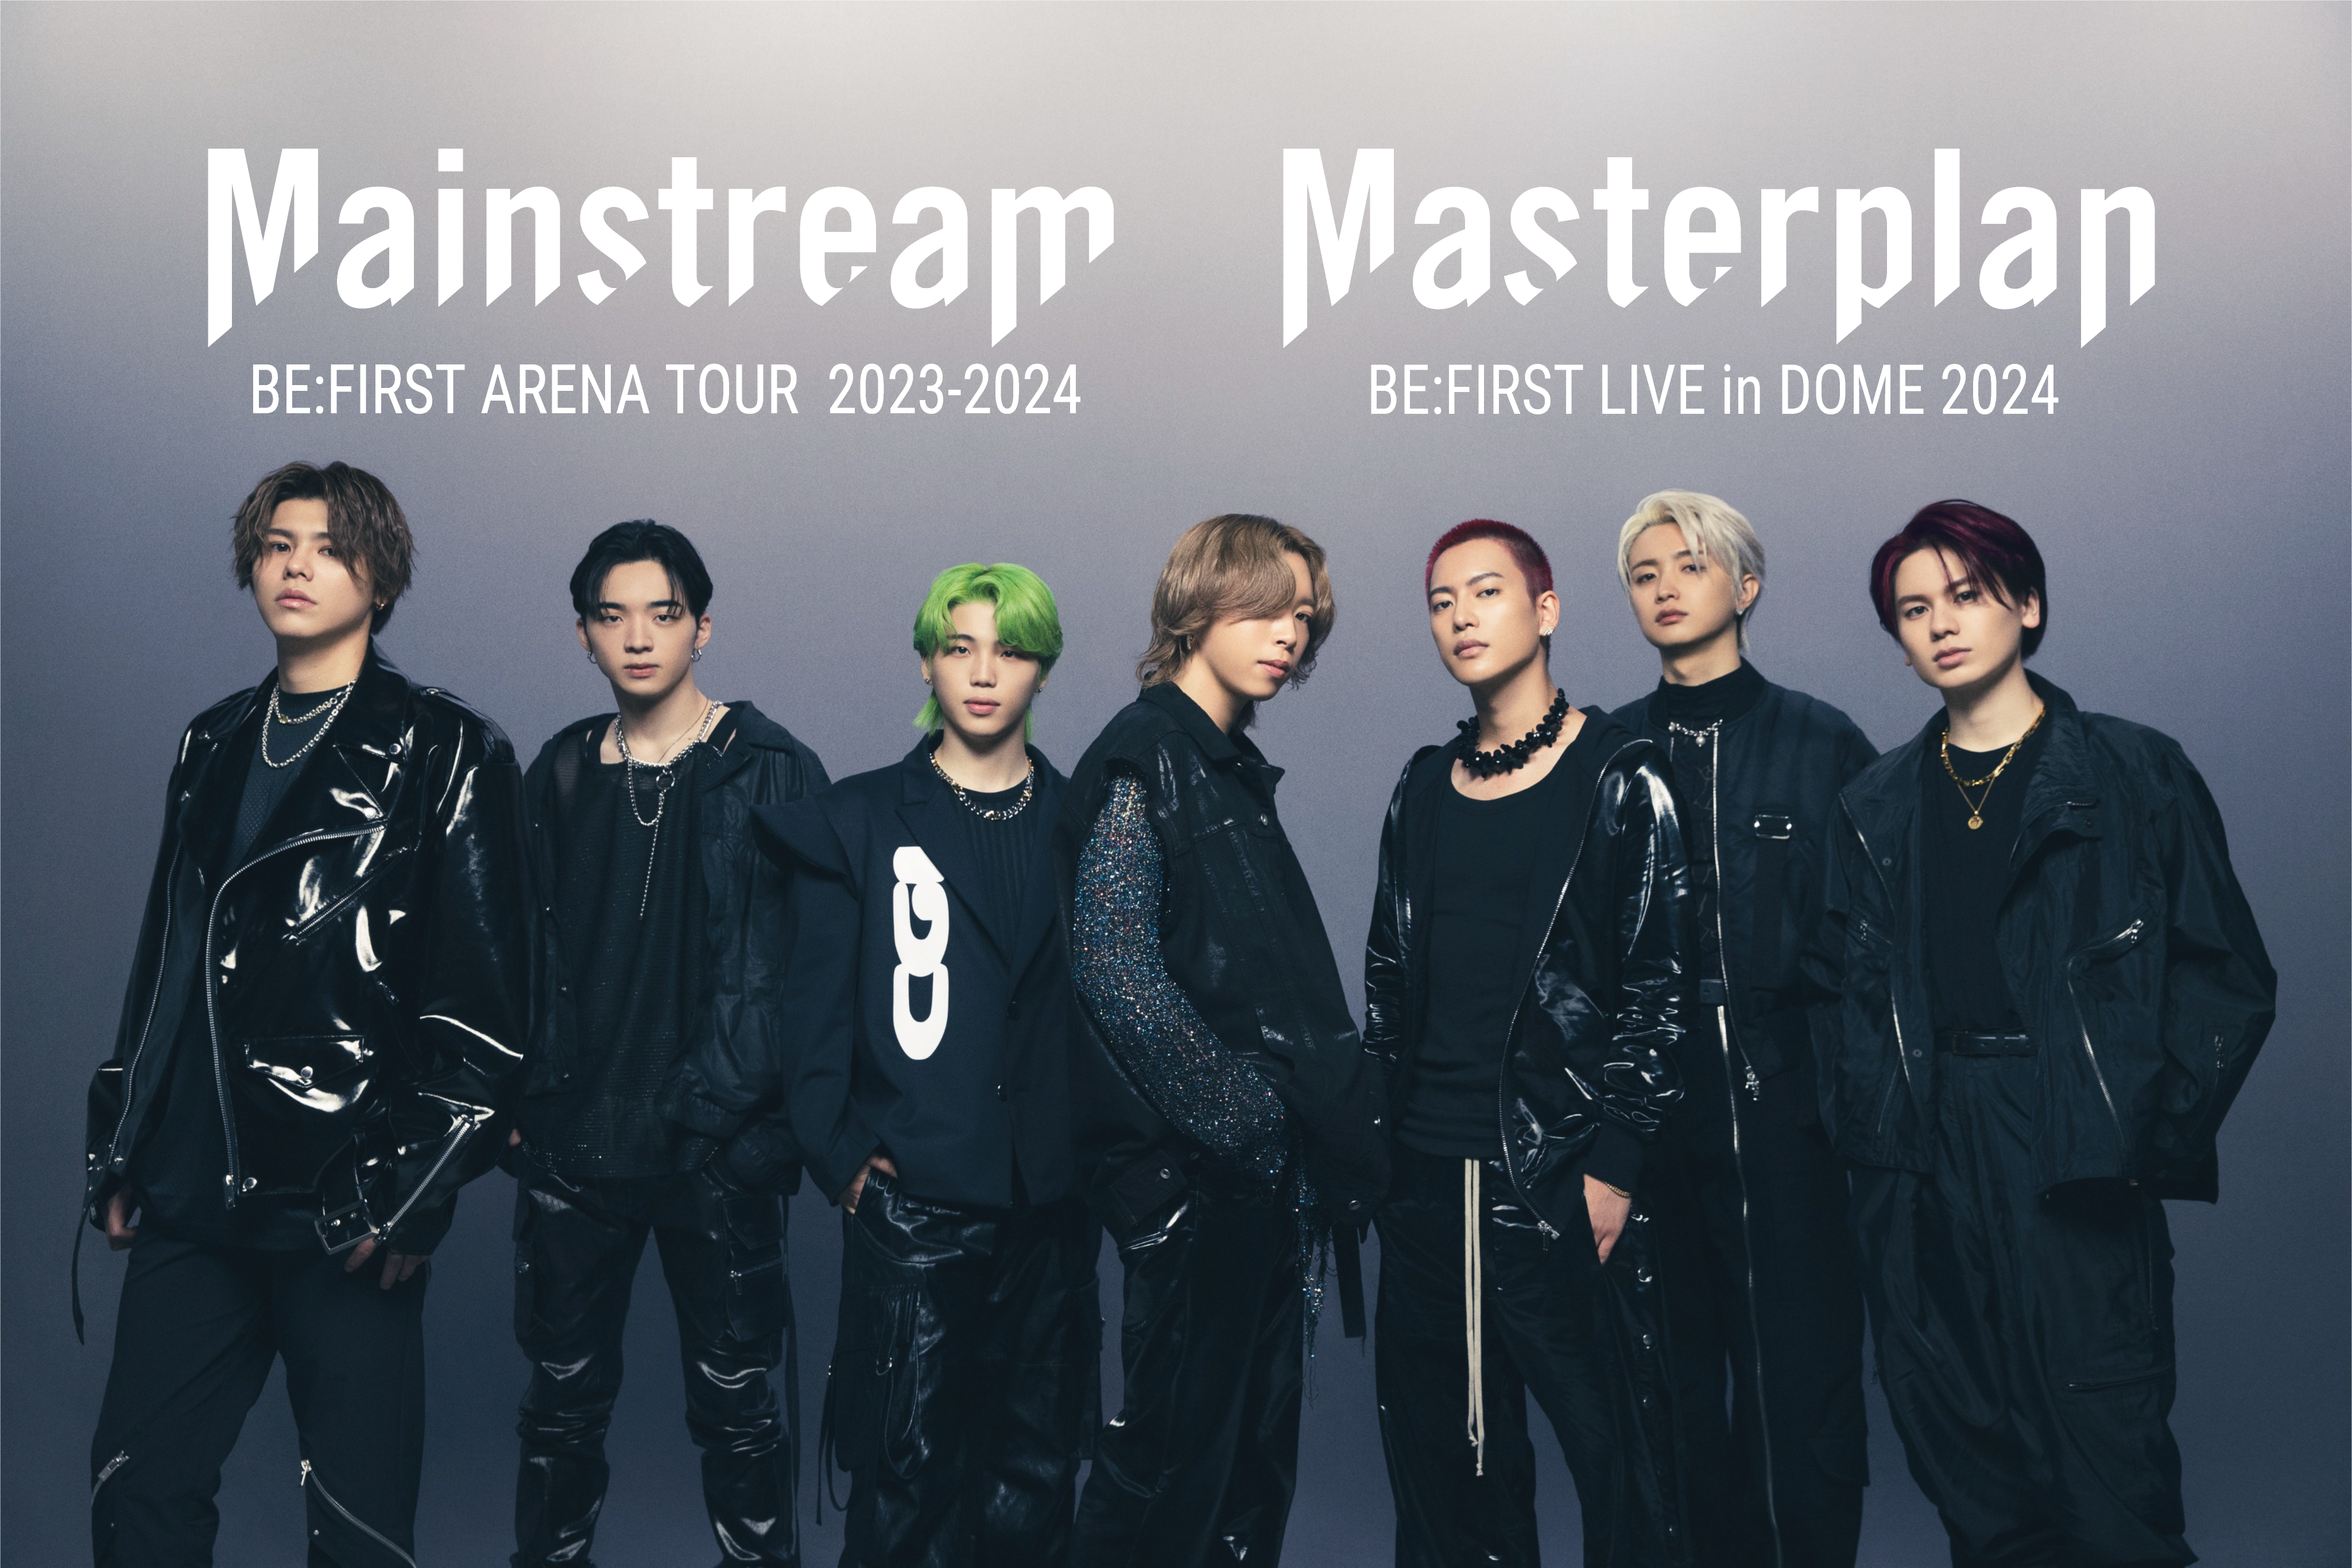 BE:FIRST ARENA TOUR 2023-2024″Mainstream” | BE:FIRST